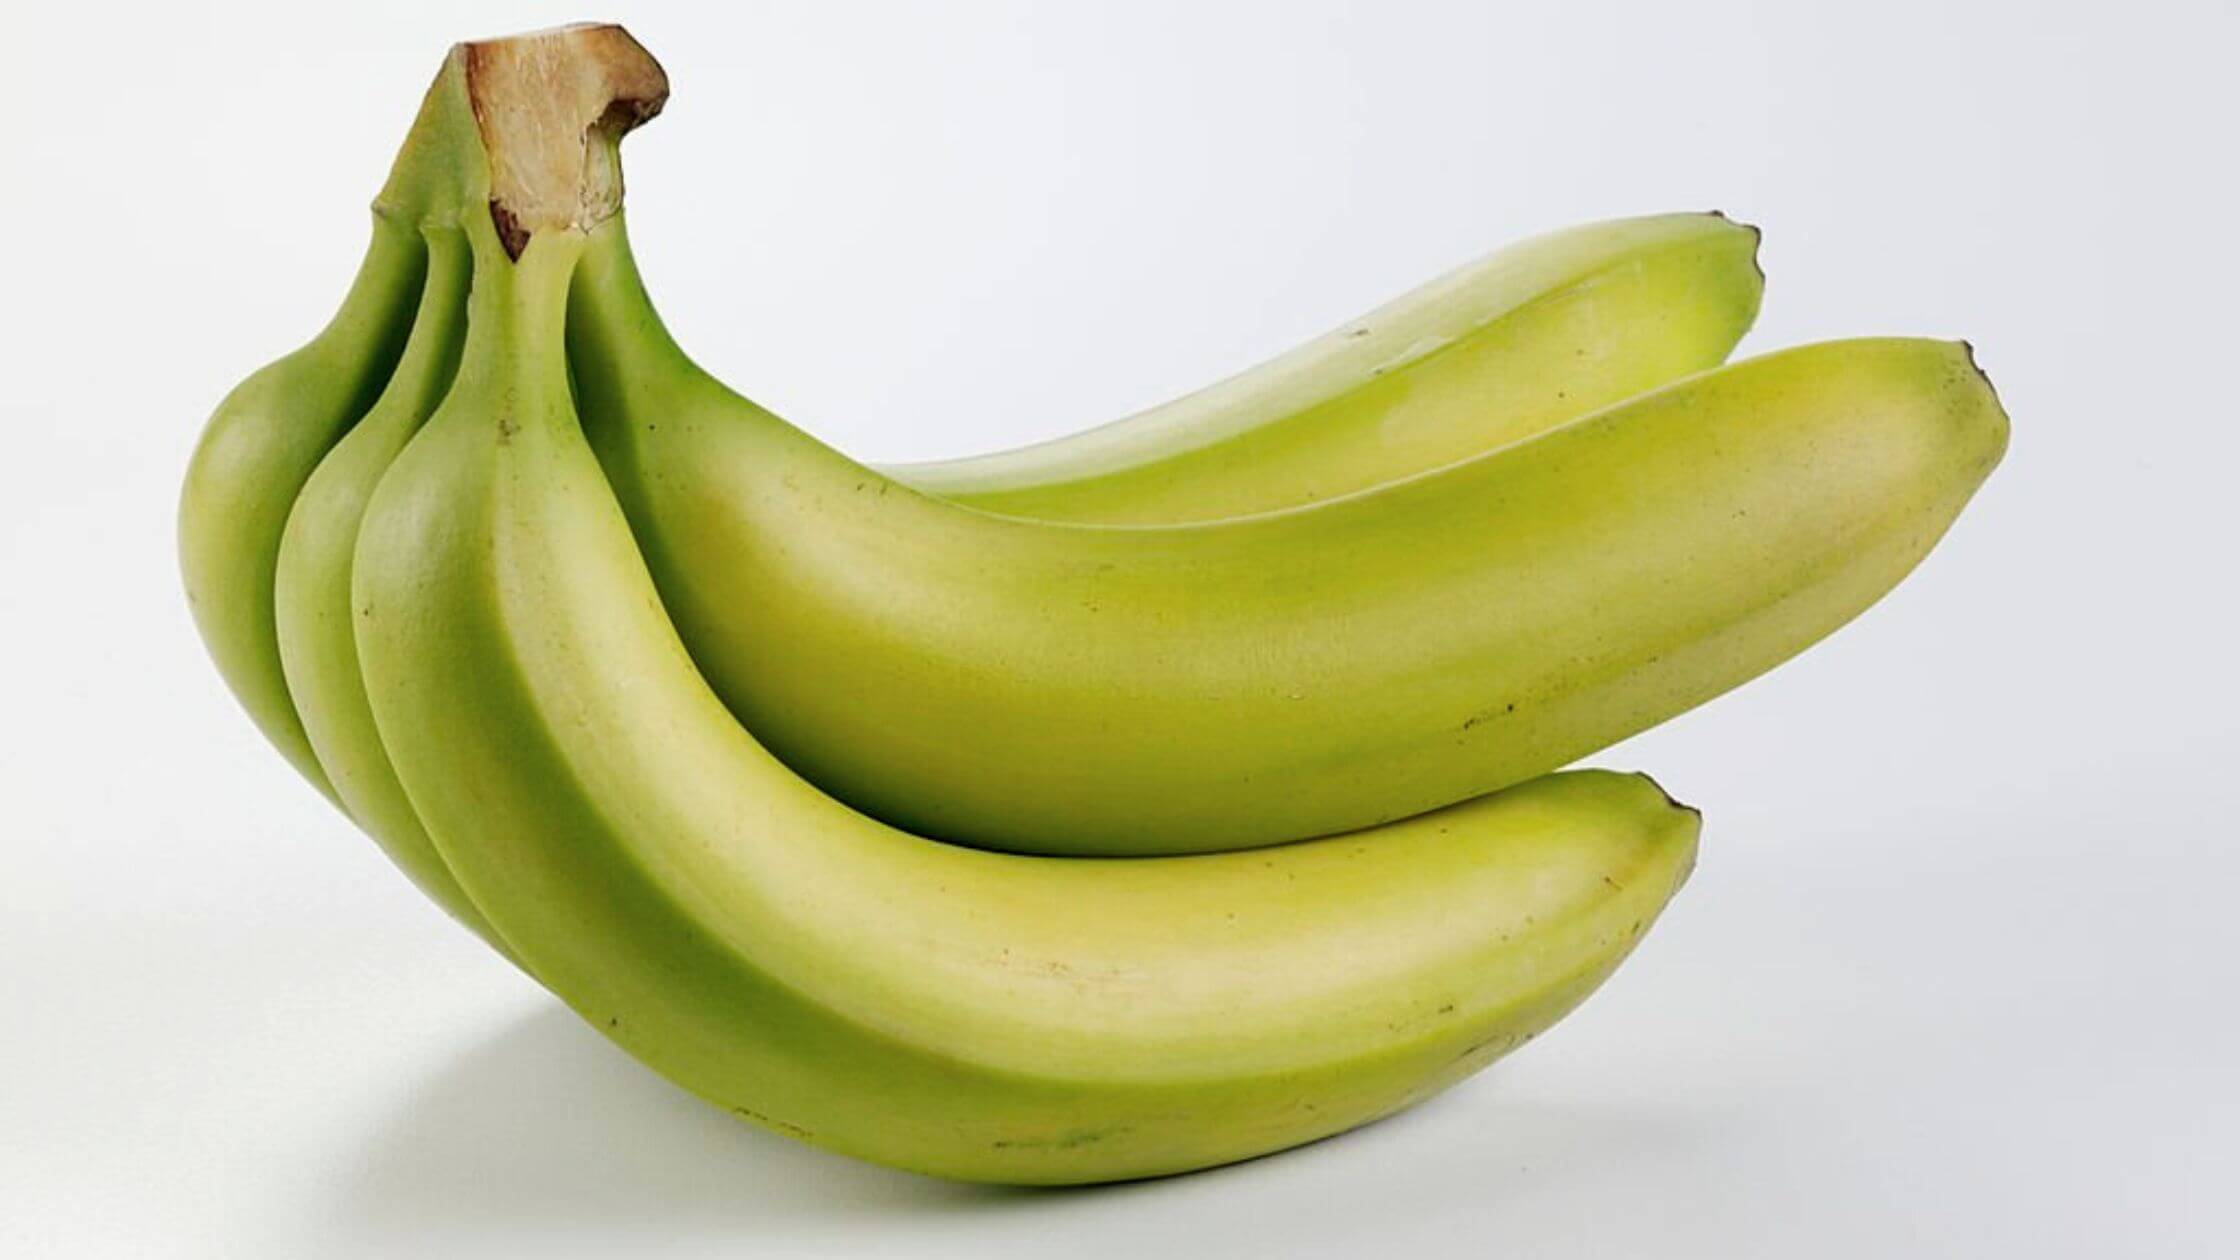 Cancer Might Be Prevented By Eating Unripe Bananas